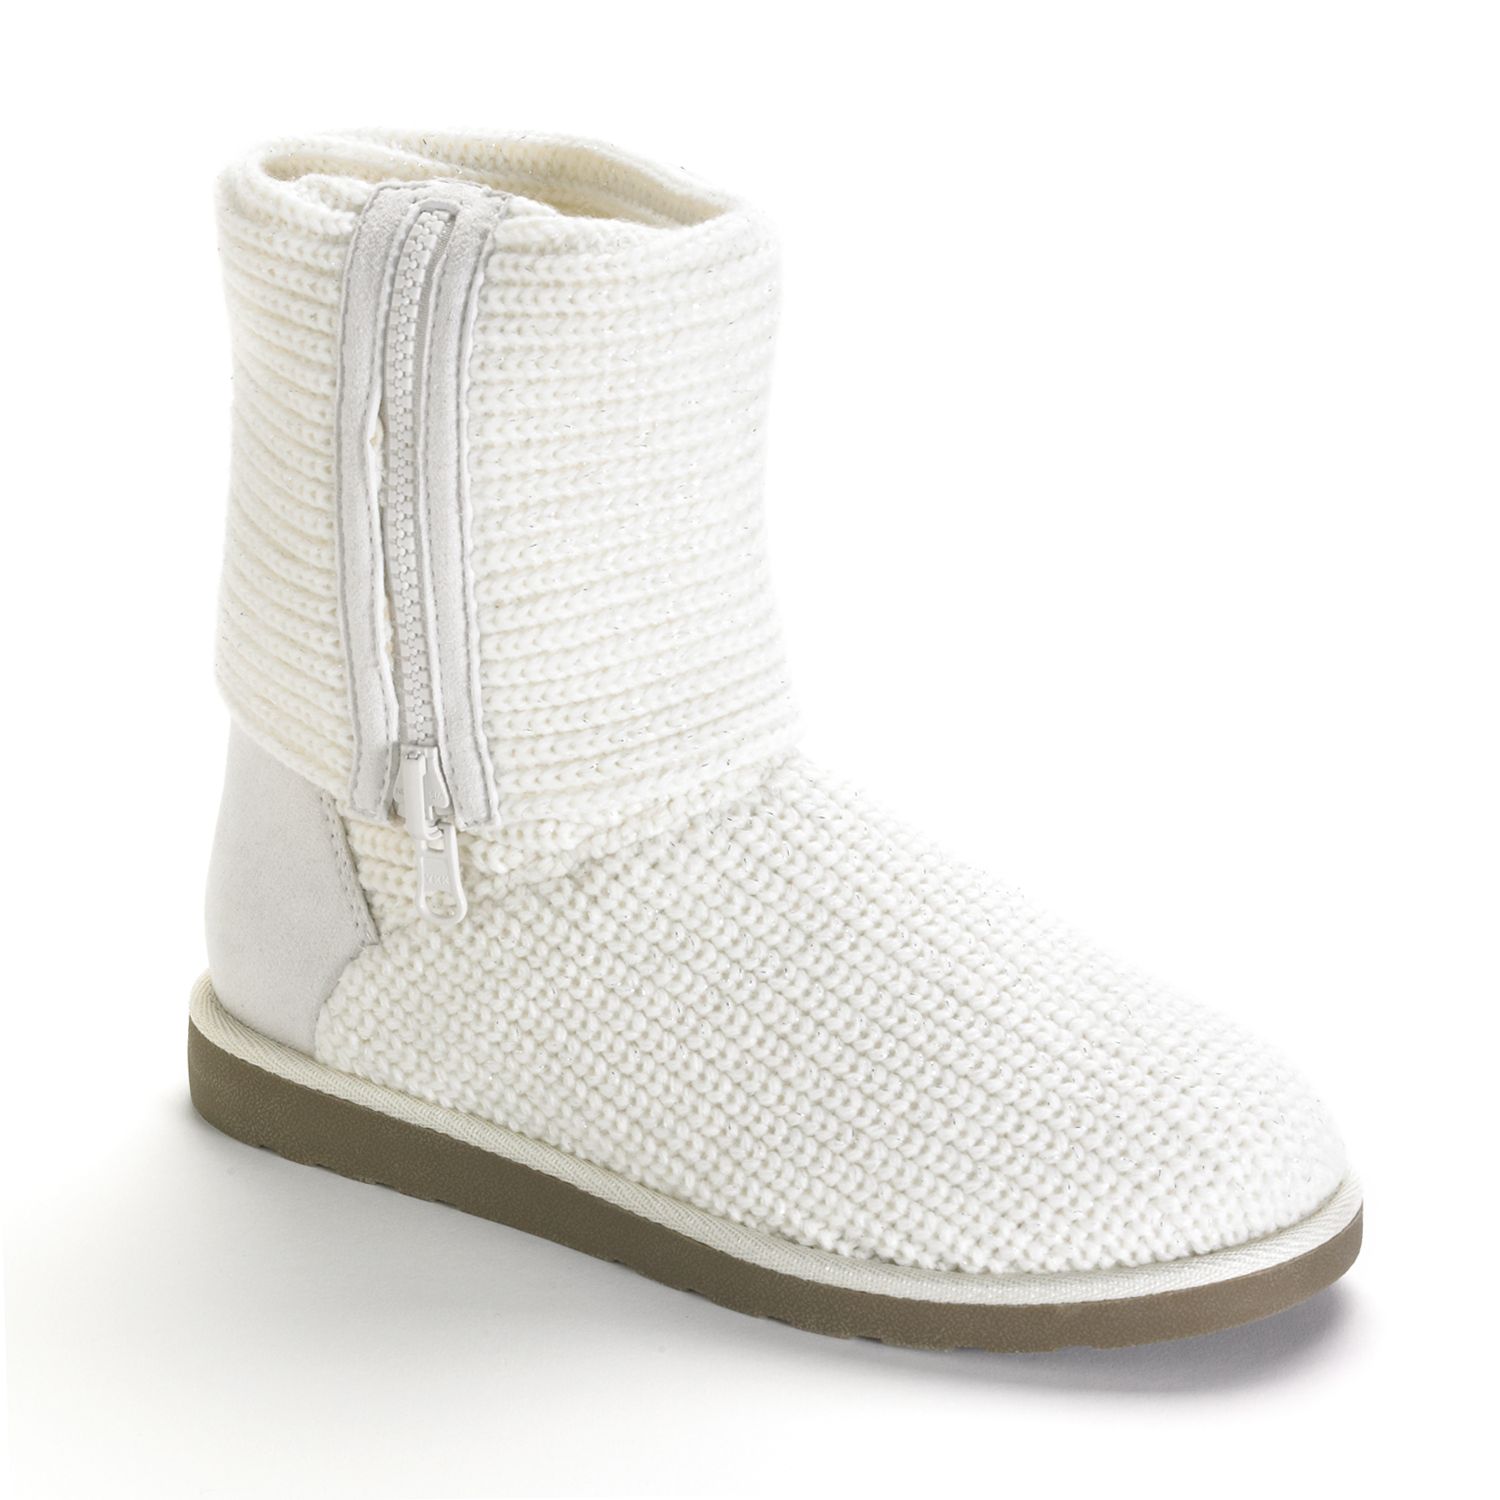 SO® Foldover Sweater Boots - Women